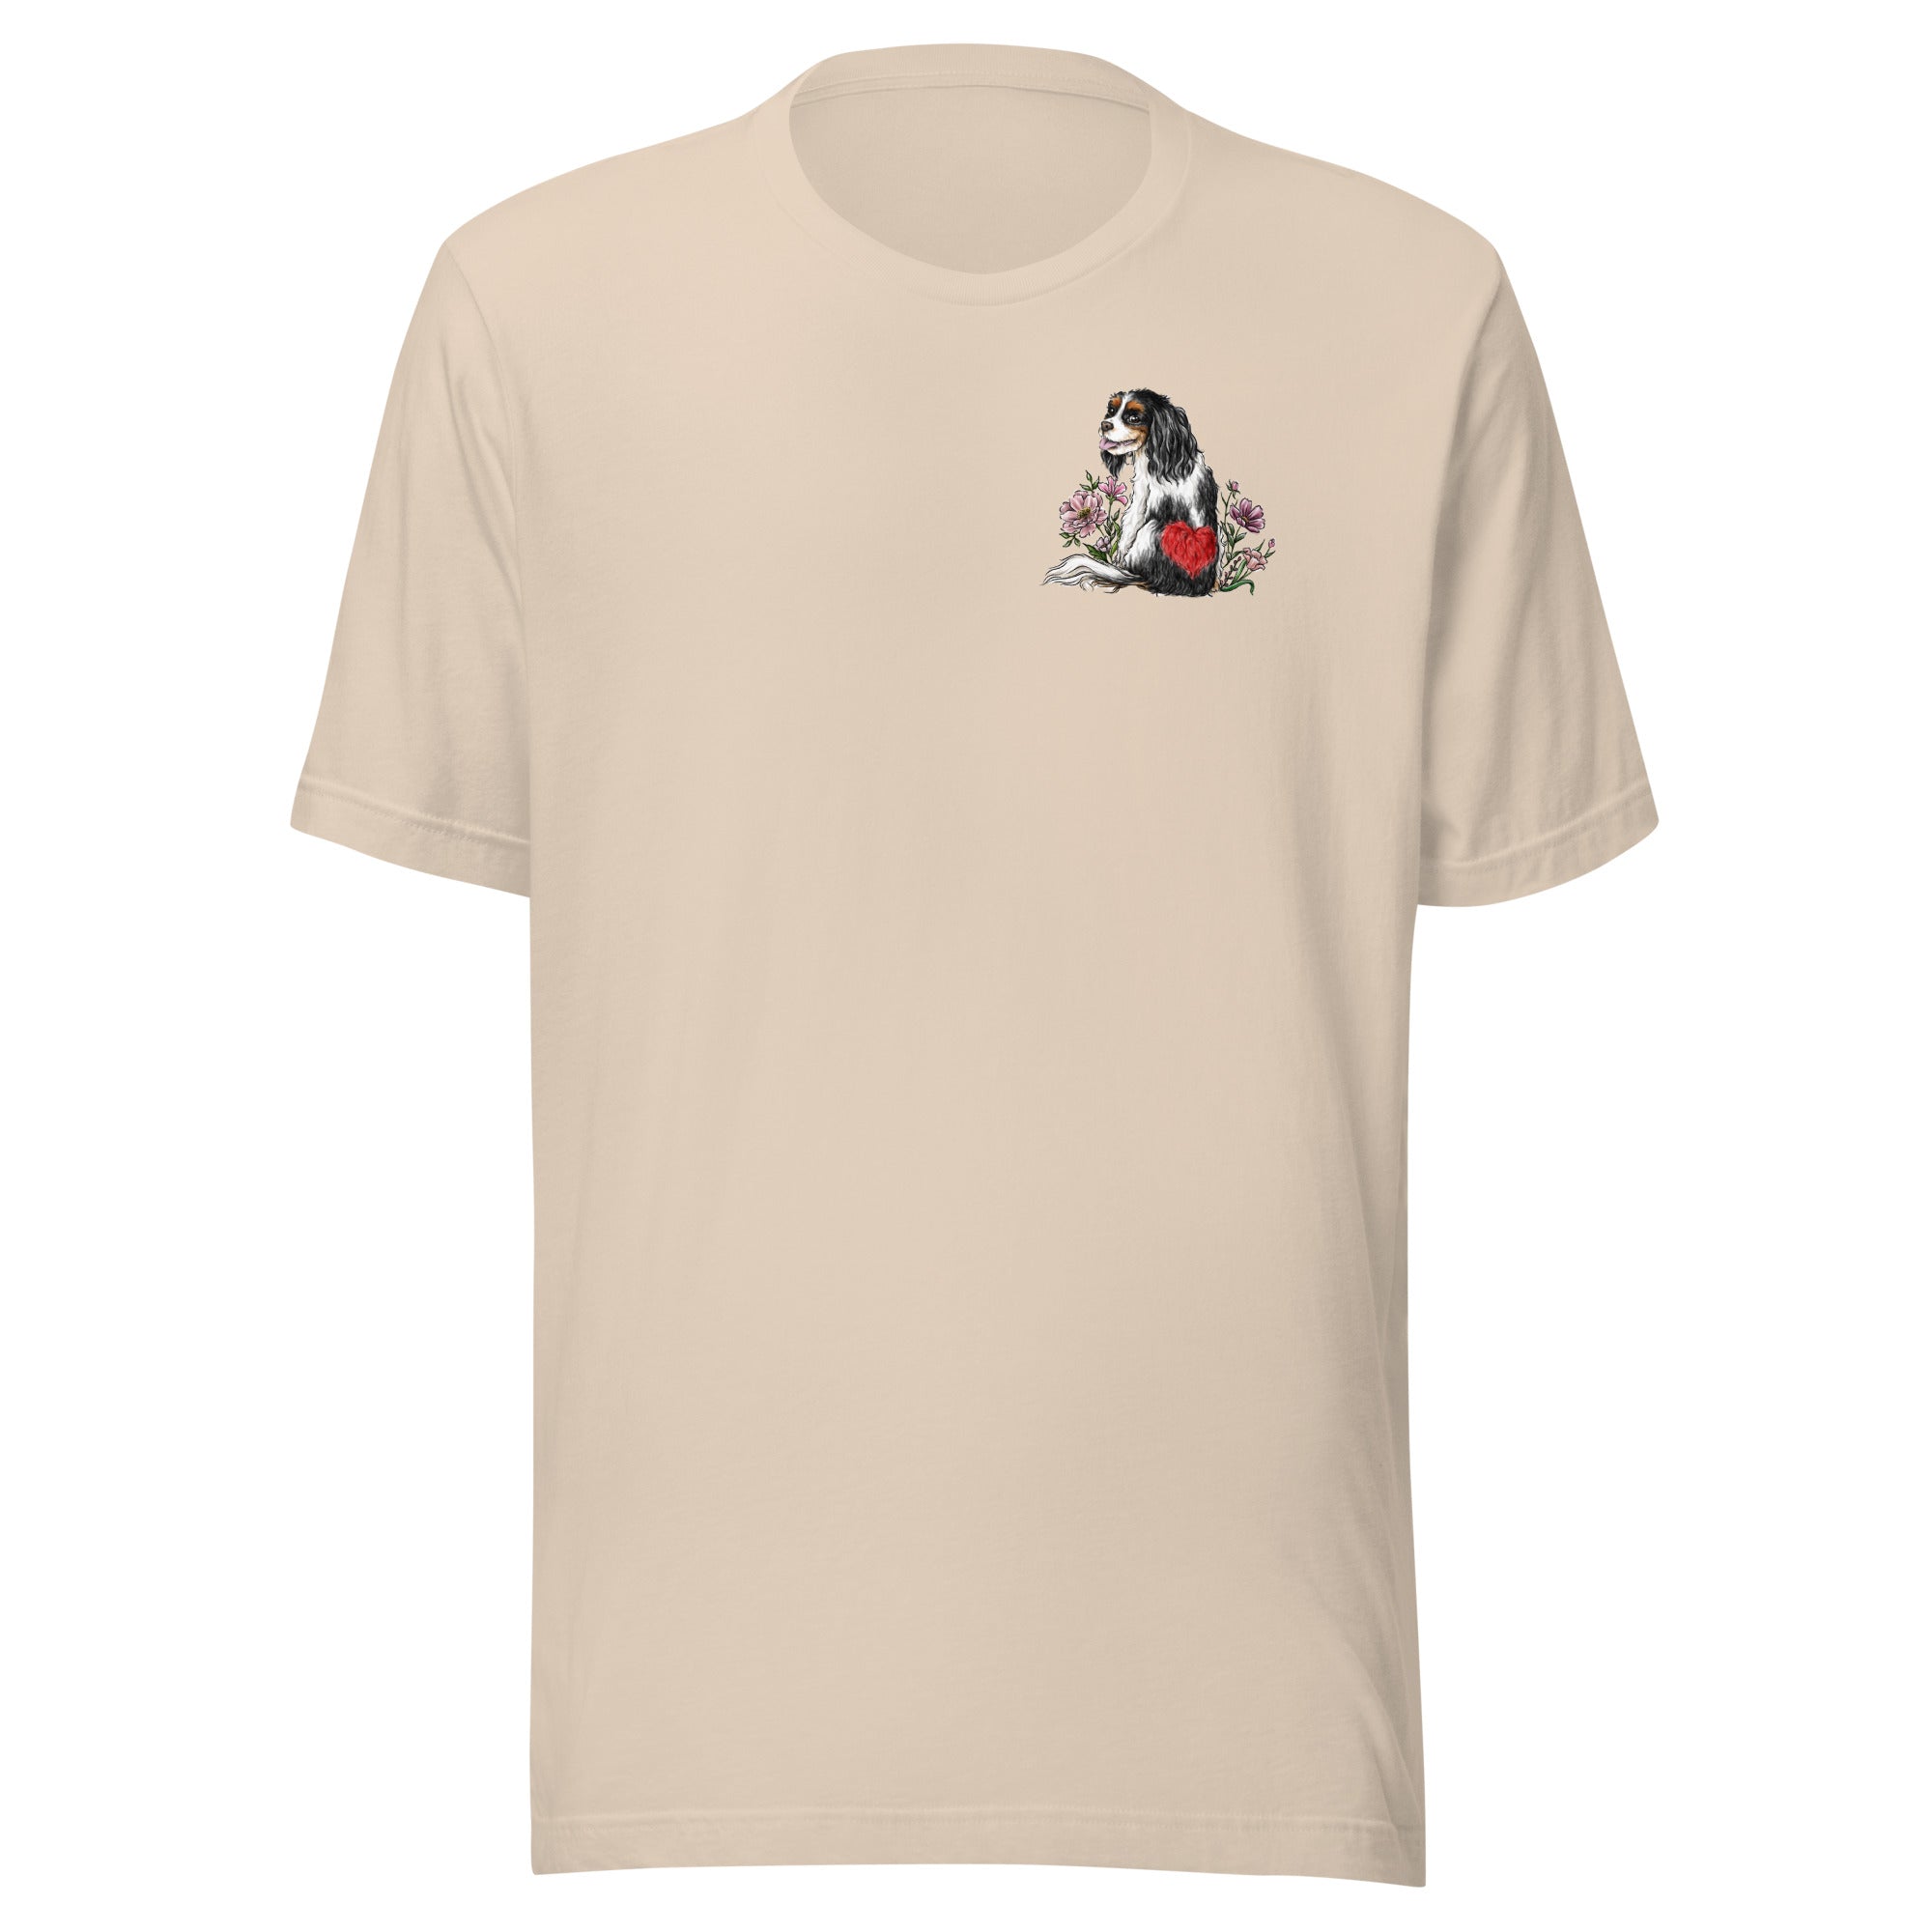 Spring Cavalier King Charles Tricolor Unisex T-shirt